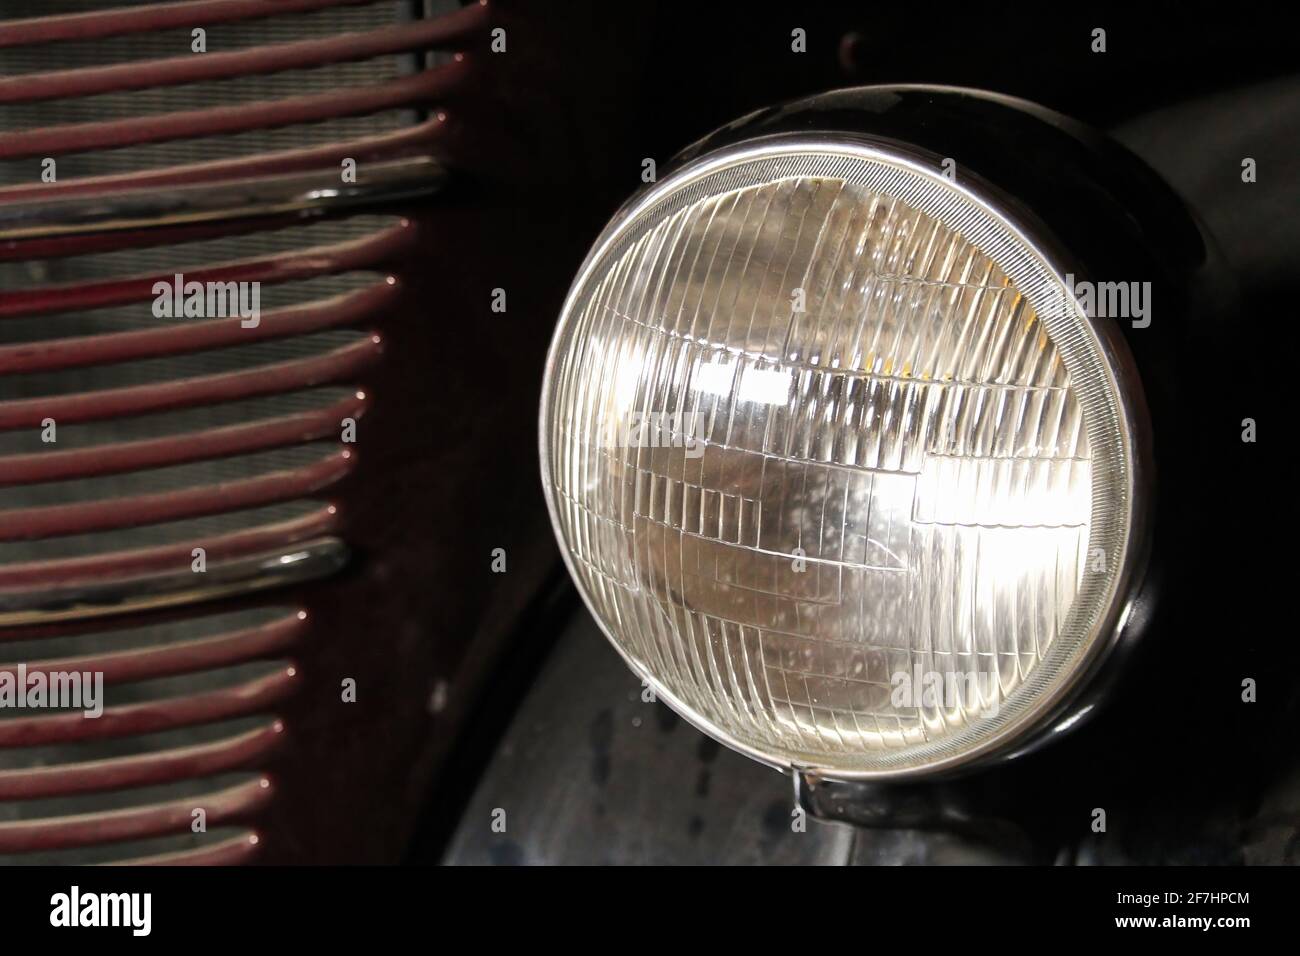 A head light on an old vintage automobile Stock Photo